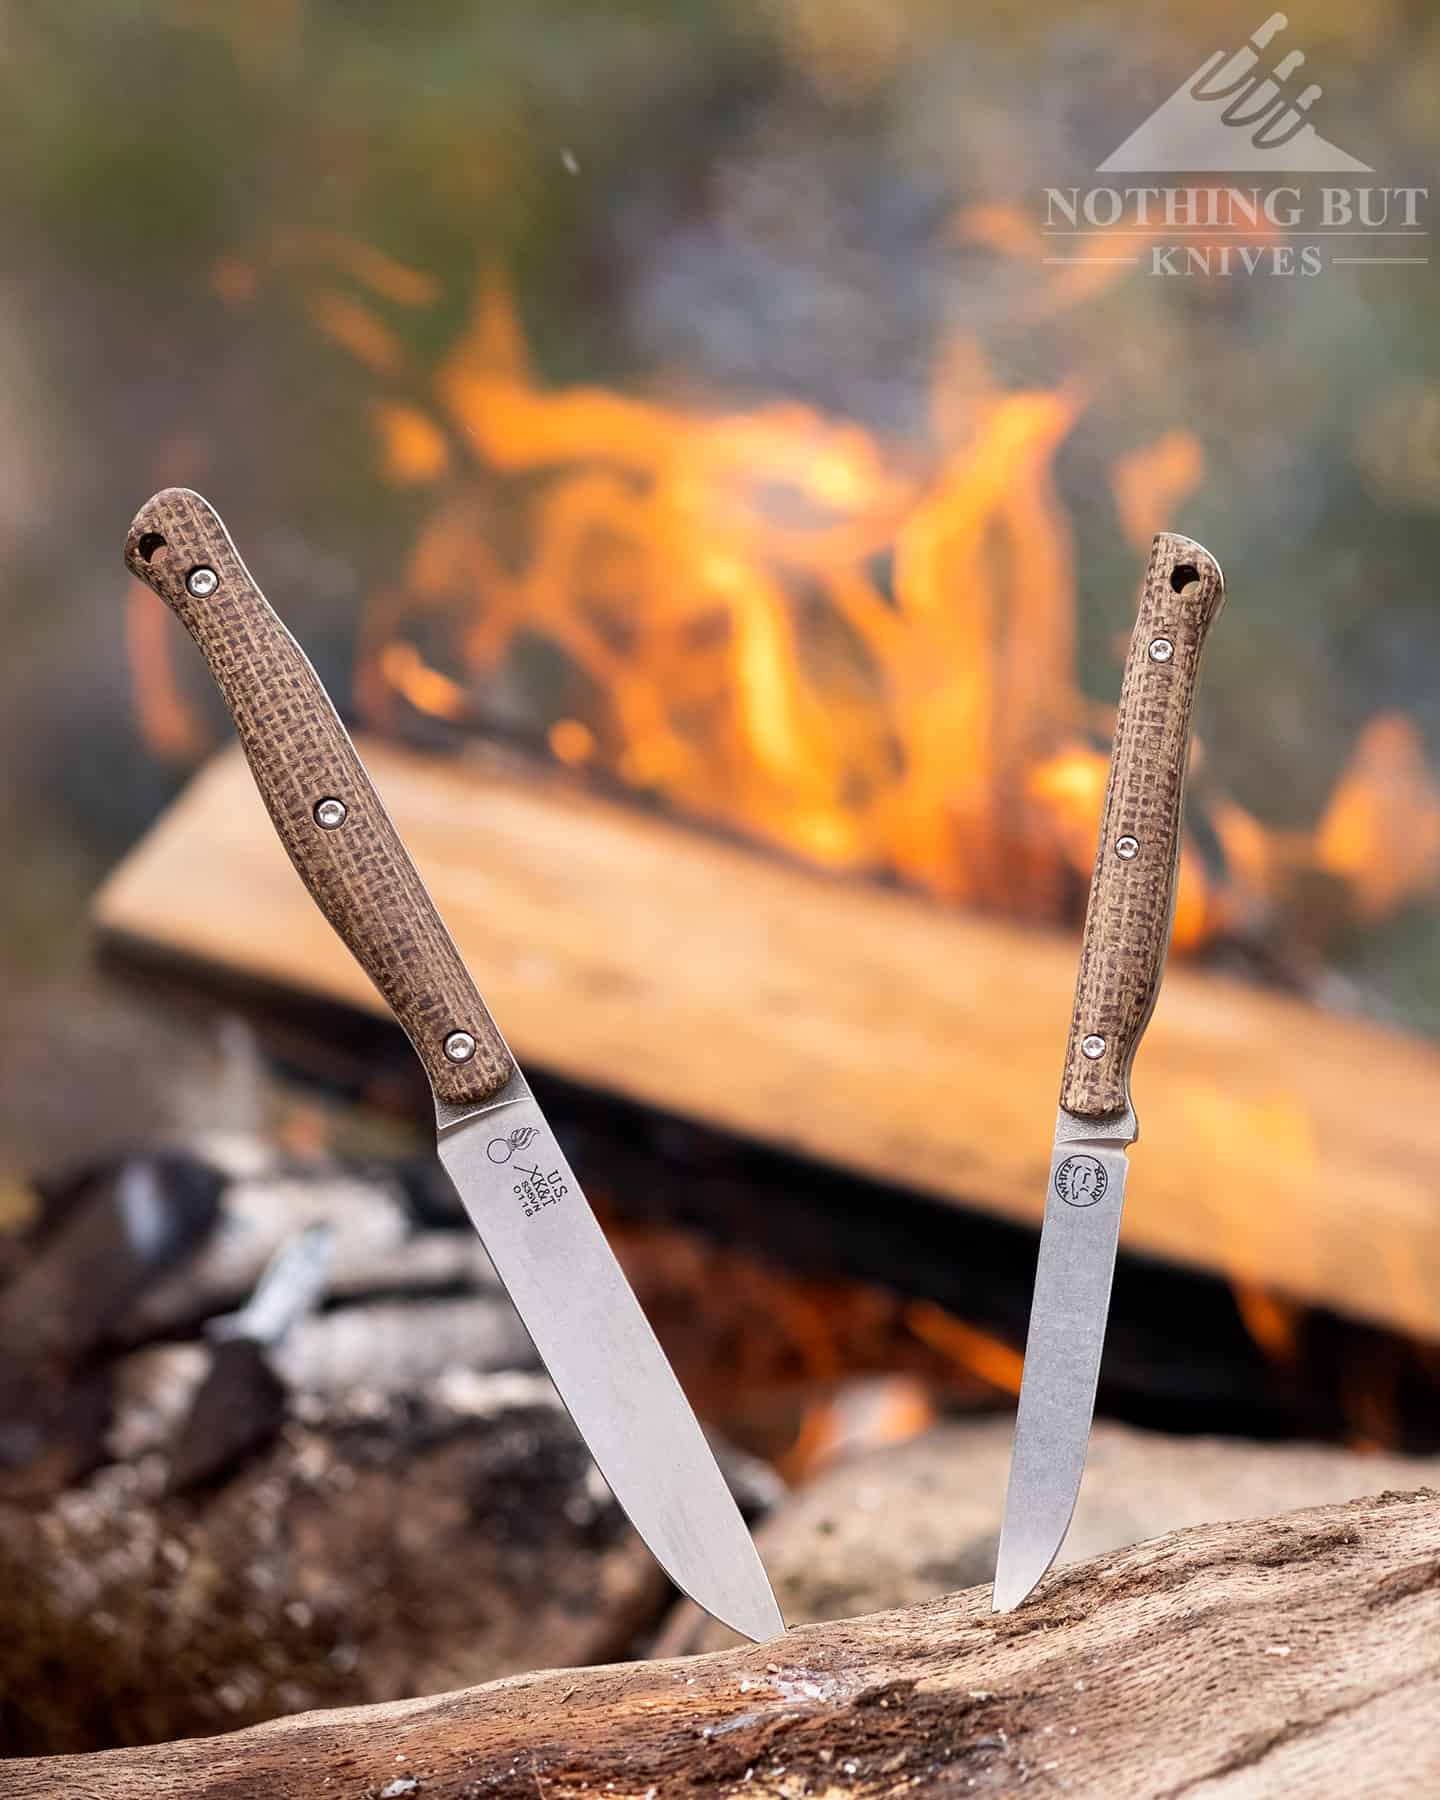 The White River Knives Exodus 3 and 4 fixed blades make great backpacking and camping knives.